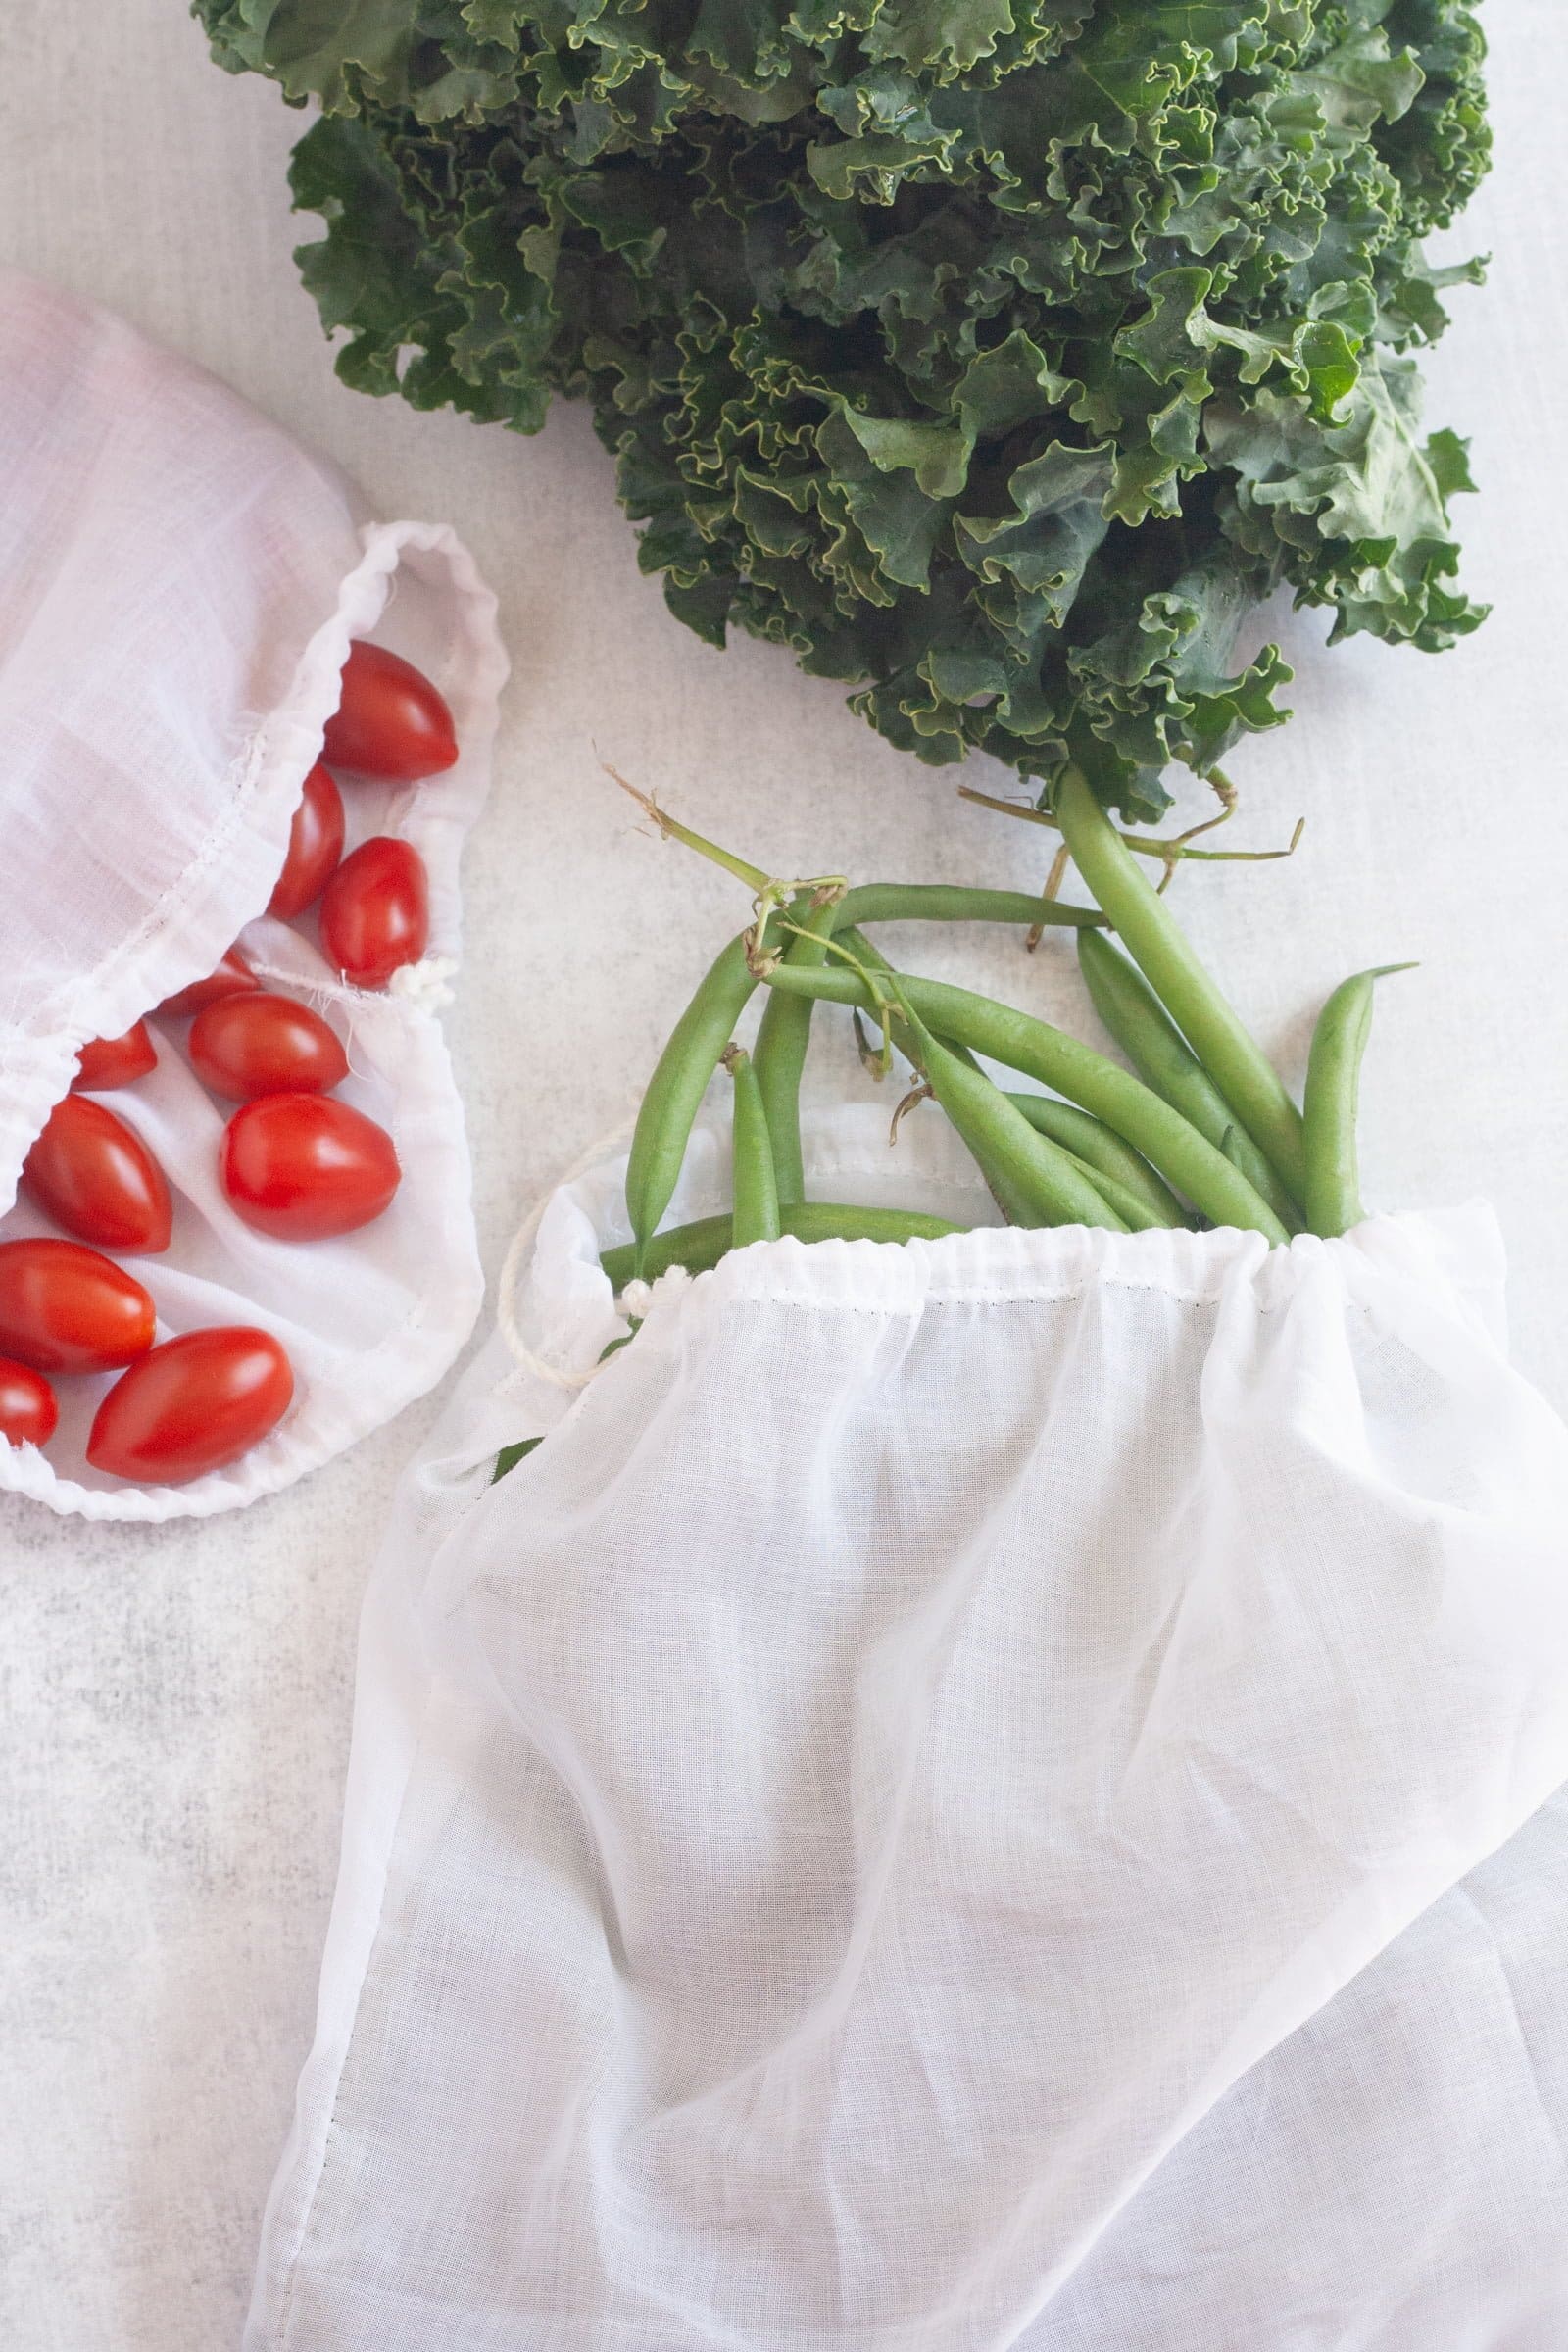 Three white cotton voile reusable produce bags filled with kale, cherry tomatoes, and green beans.